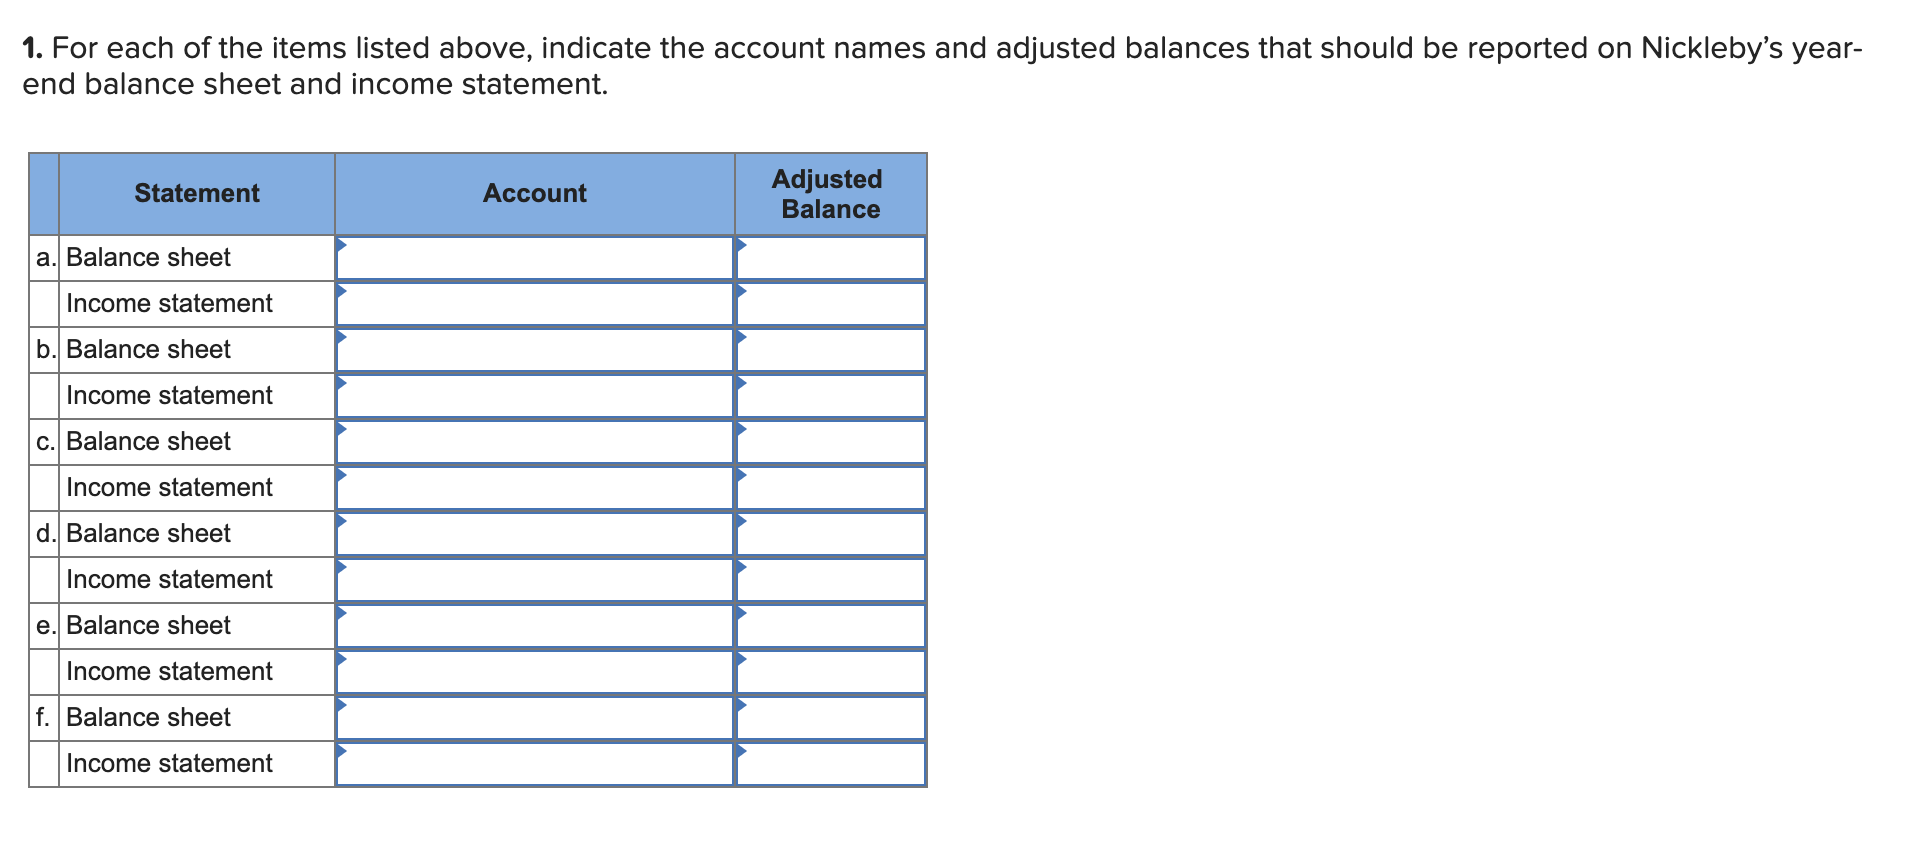 1. for each of the items listed above, indicate the account names and adjusted balances that should be reported on nicklebys